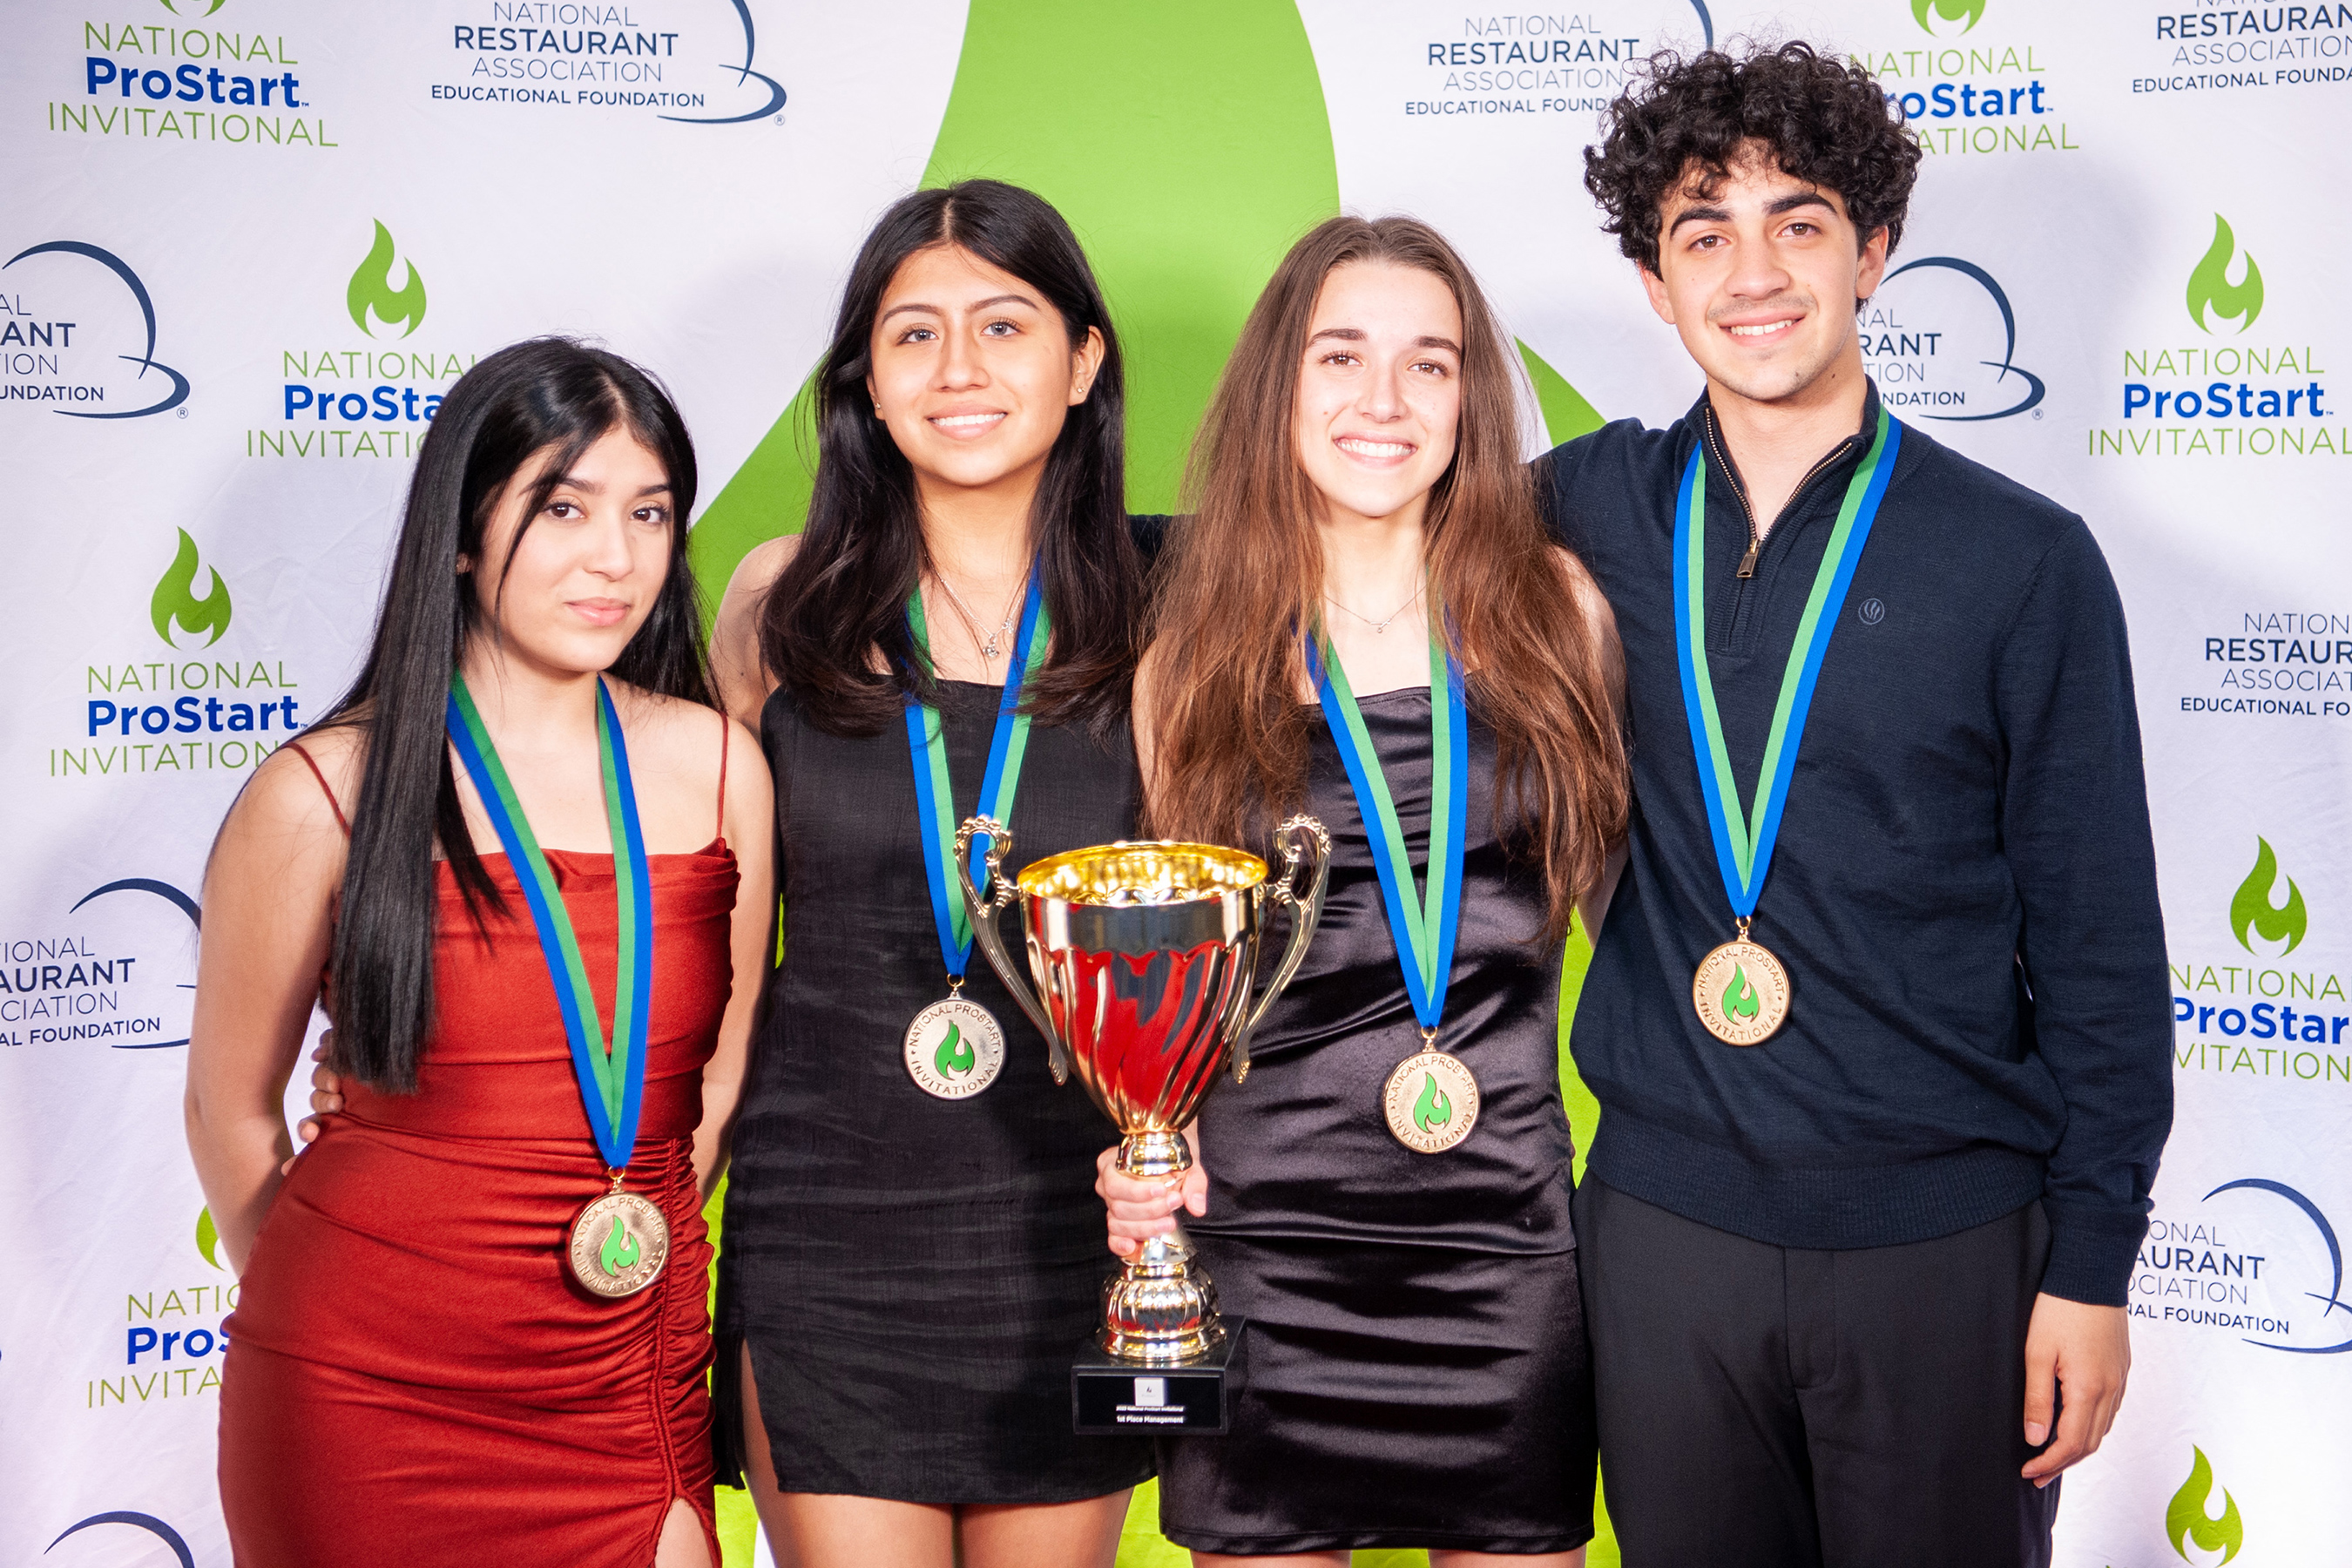 The ProStart team from Wilbur Cross High School in New Haven, Connecticut, captured the restaurant management competition, where they faced off against teams from 45 other states. L-R: Jailyn Gonzalez, Paulette Jara, Charlotte Buterbaugh, Adam Sharqawe.